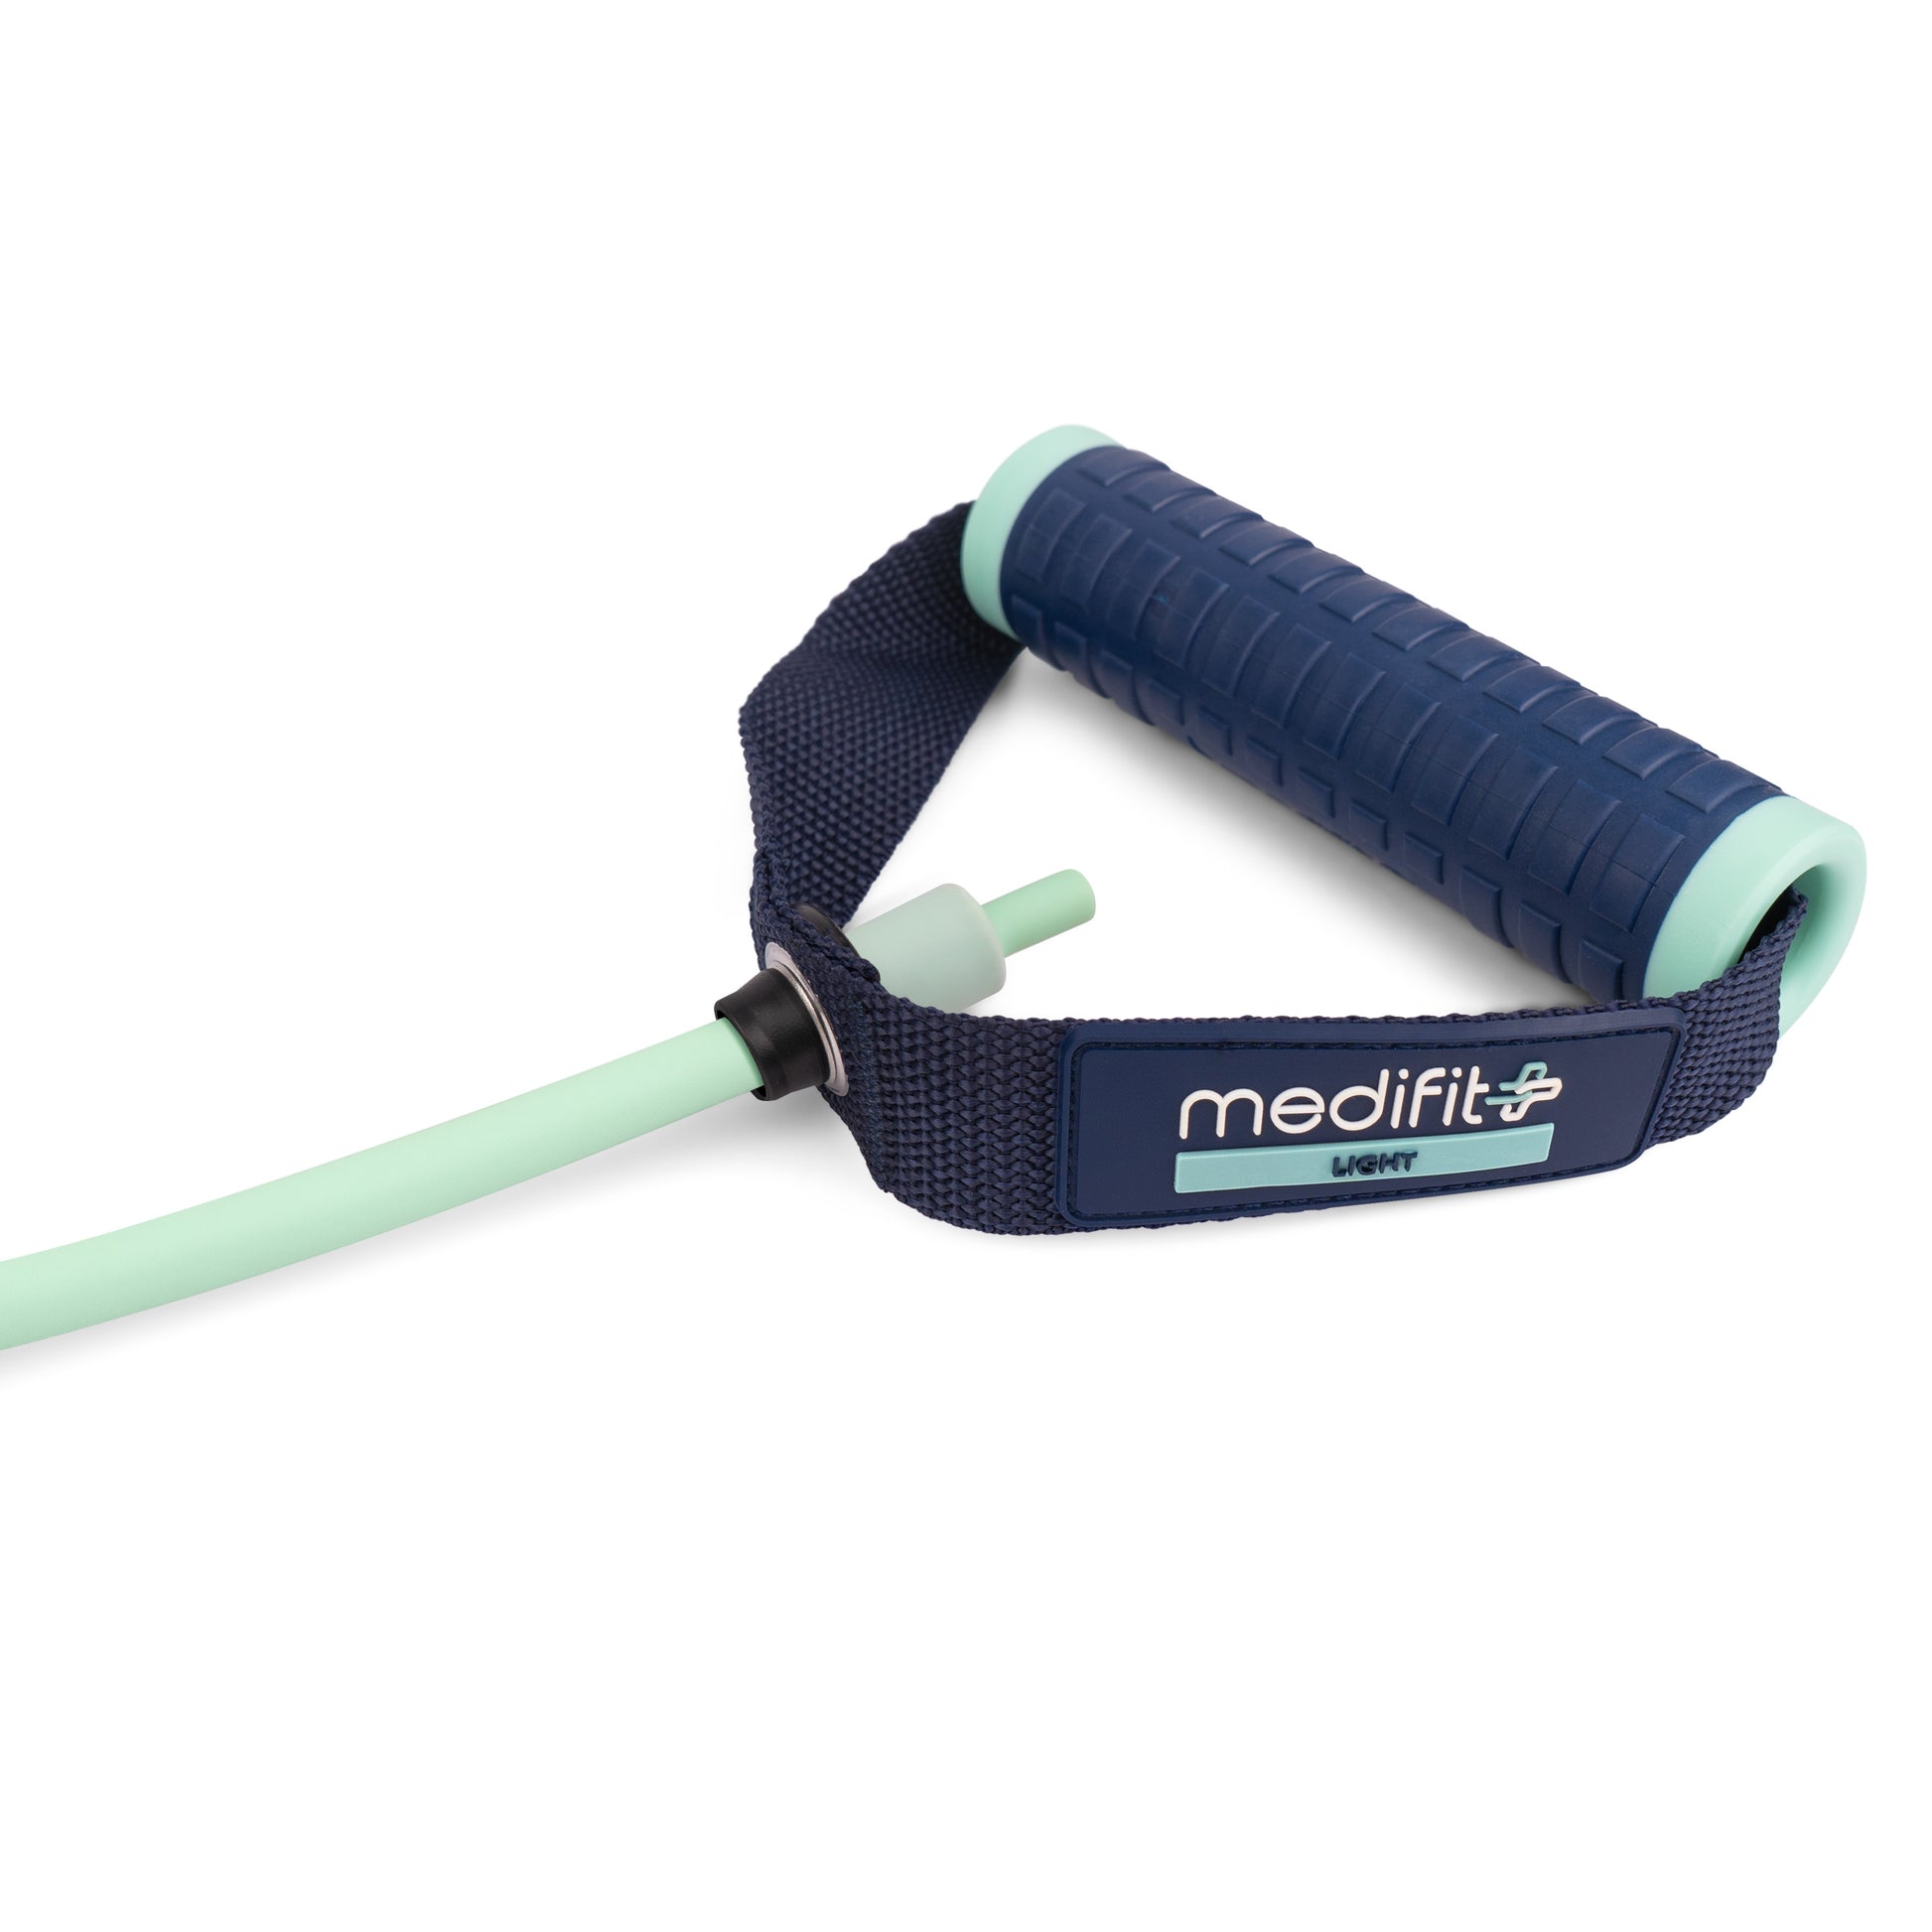 MEDIFIT ACTIVE TUBE 1